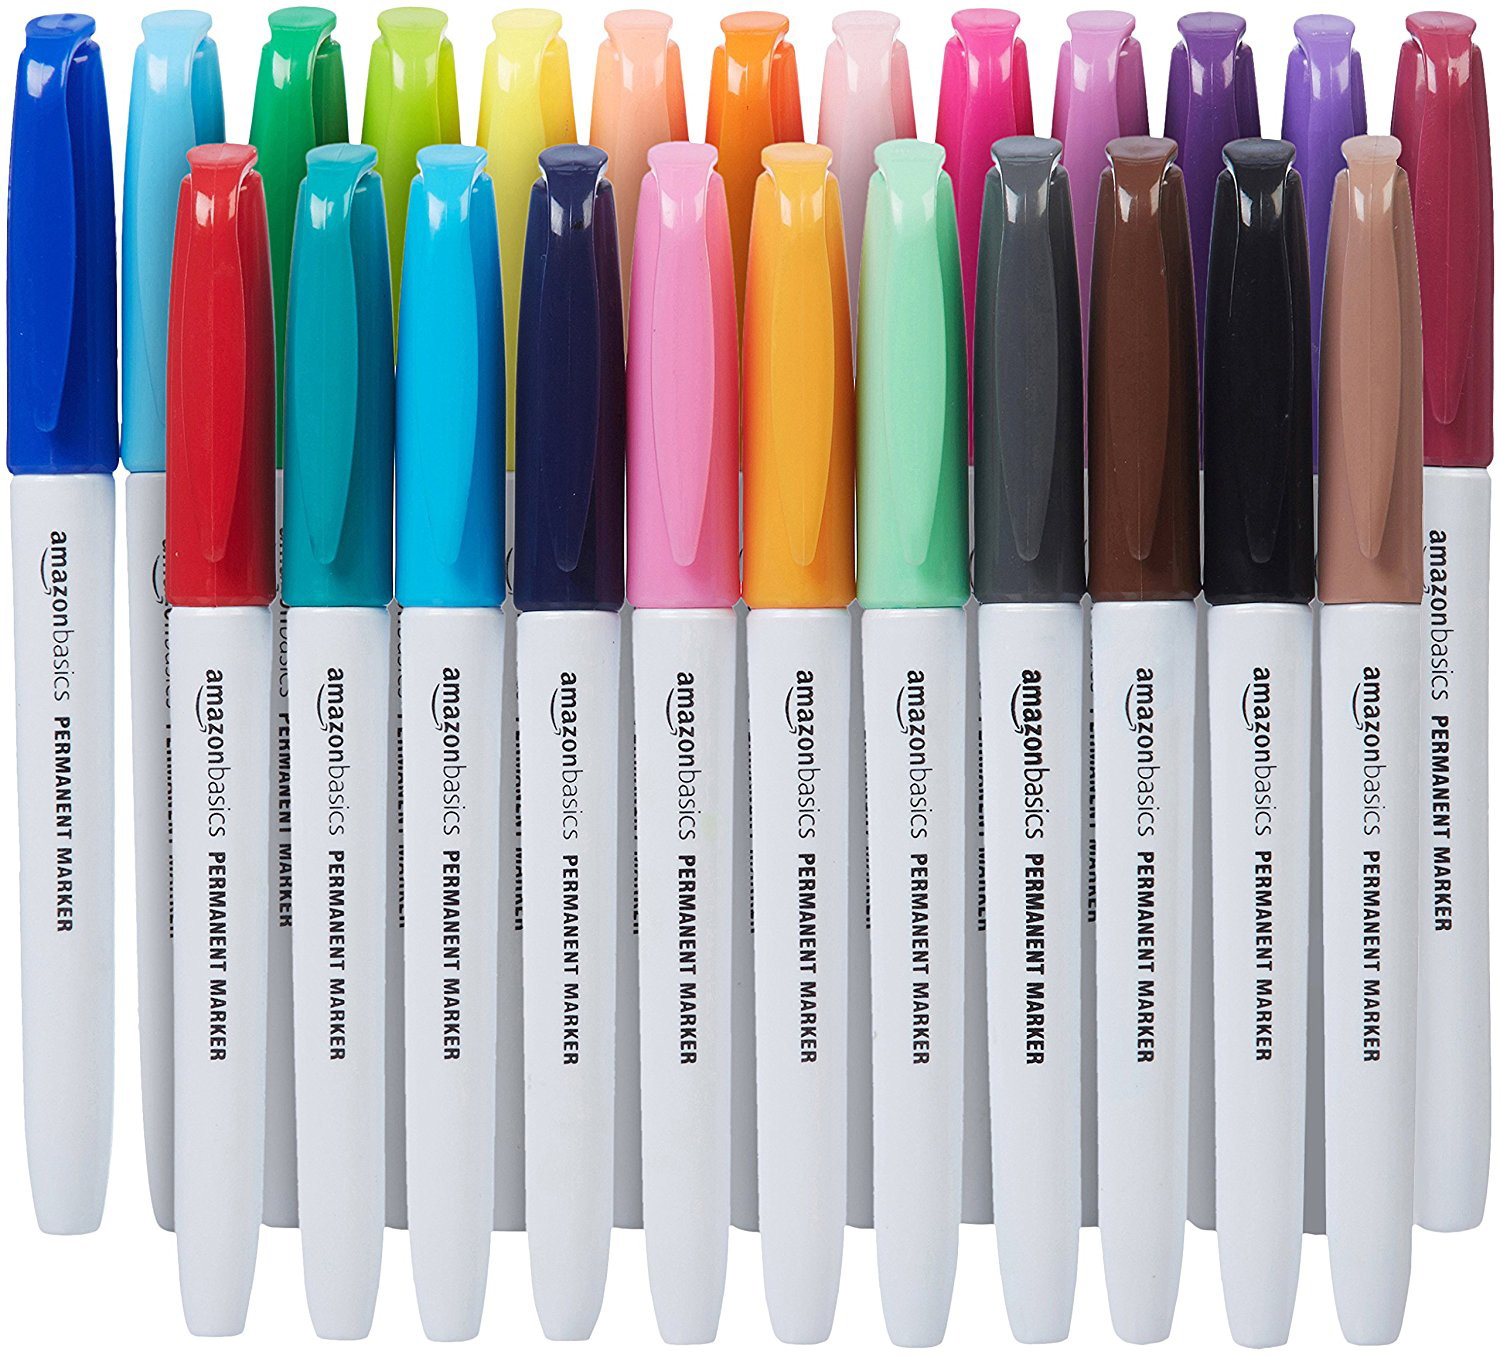 sharpie markers 24 pack